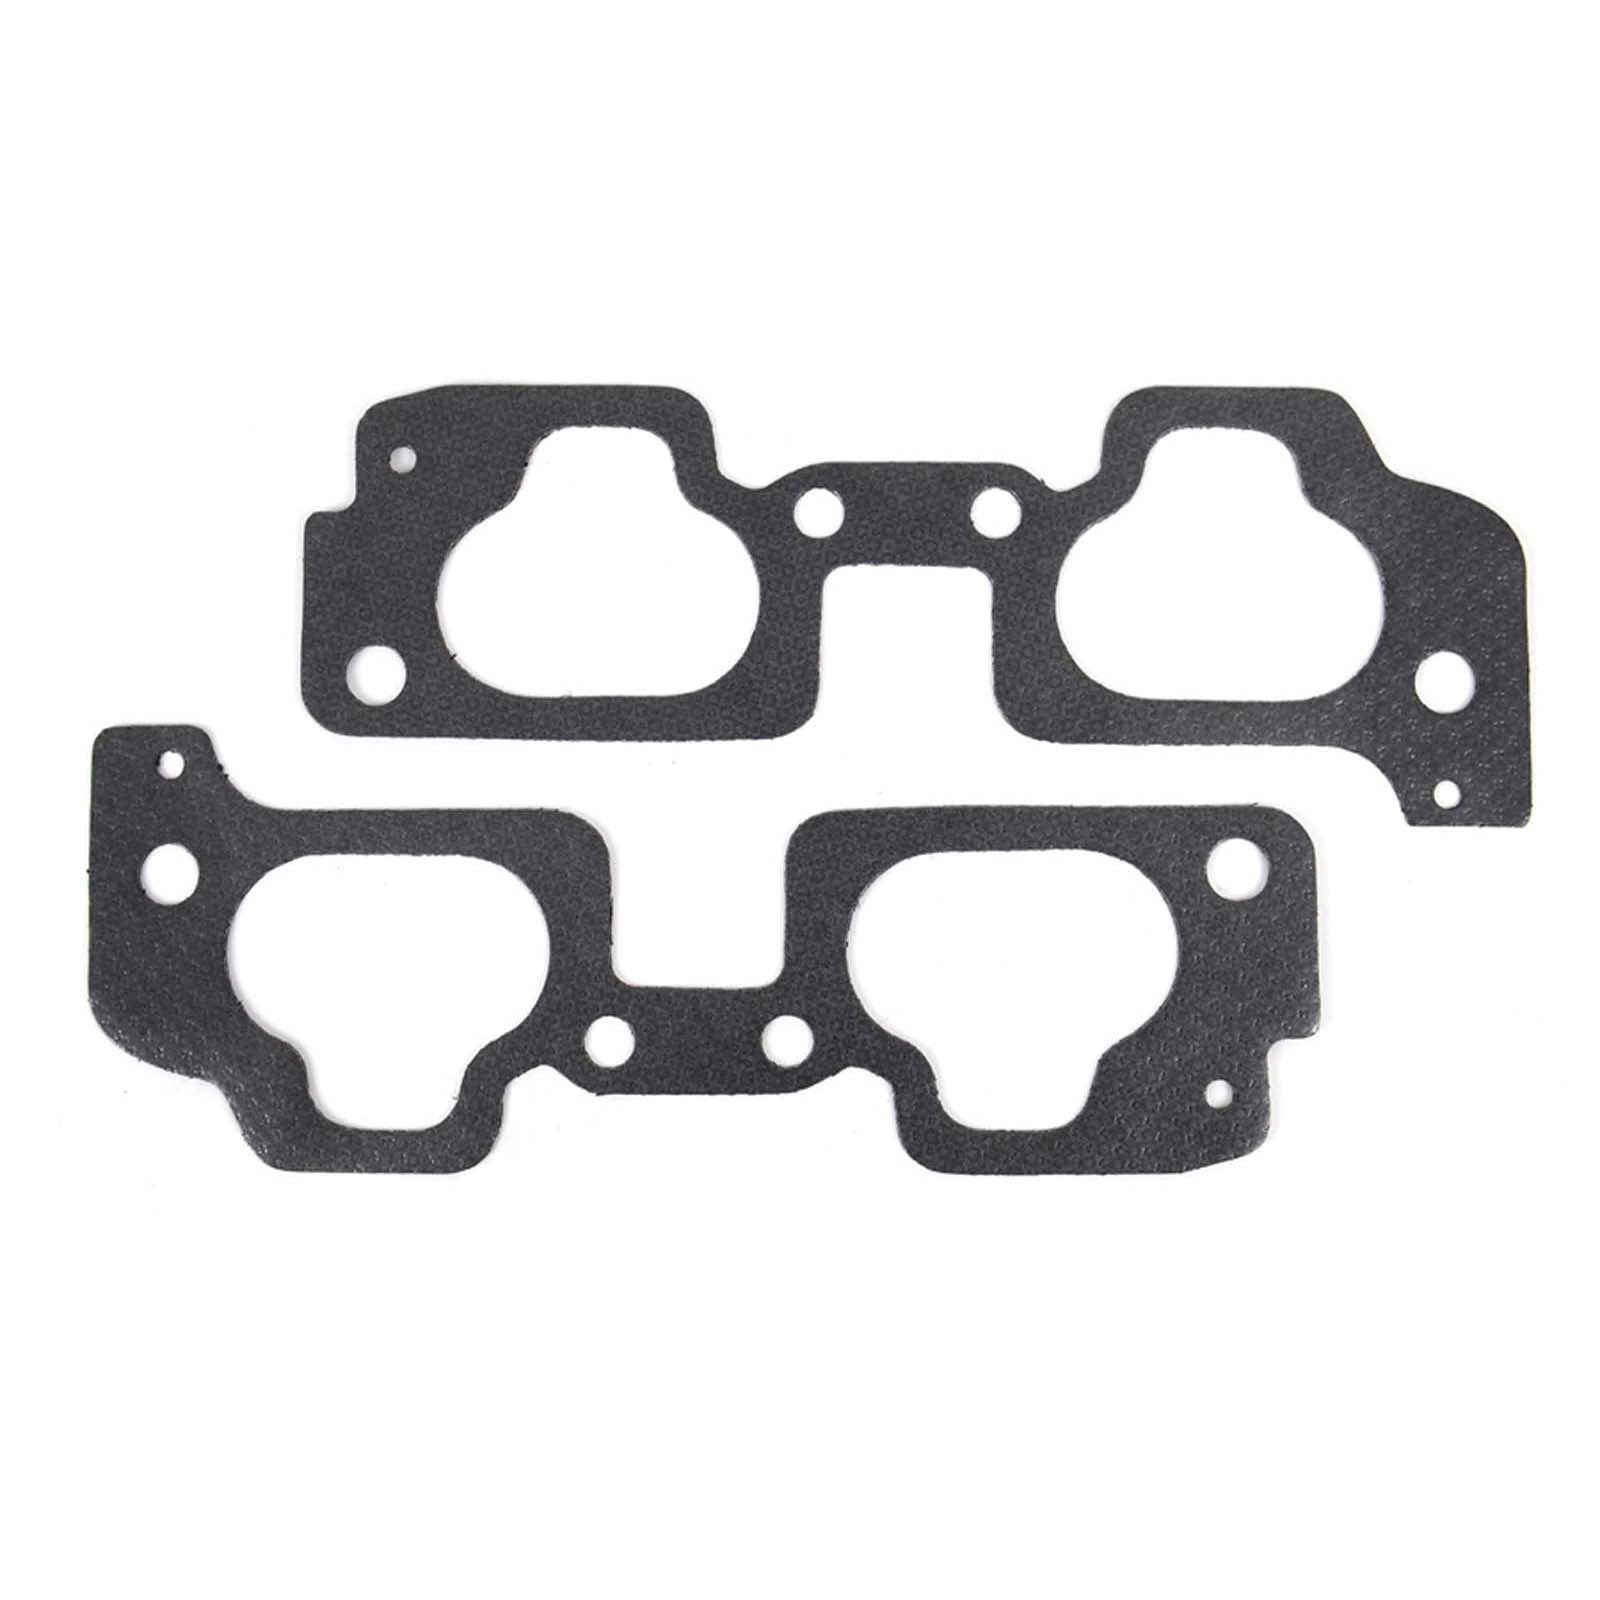 GrimmSpeed Intake Manifold-to-Head Gasket (pair) - Impreza N/A 99-08, Legacy N/A 00-09, Forester N/A 98-08